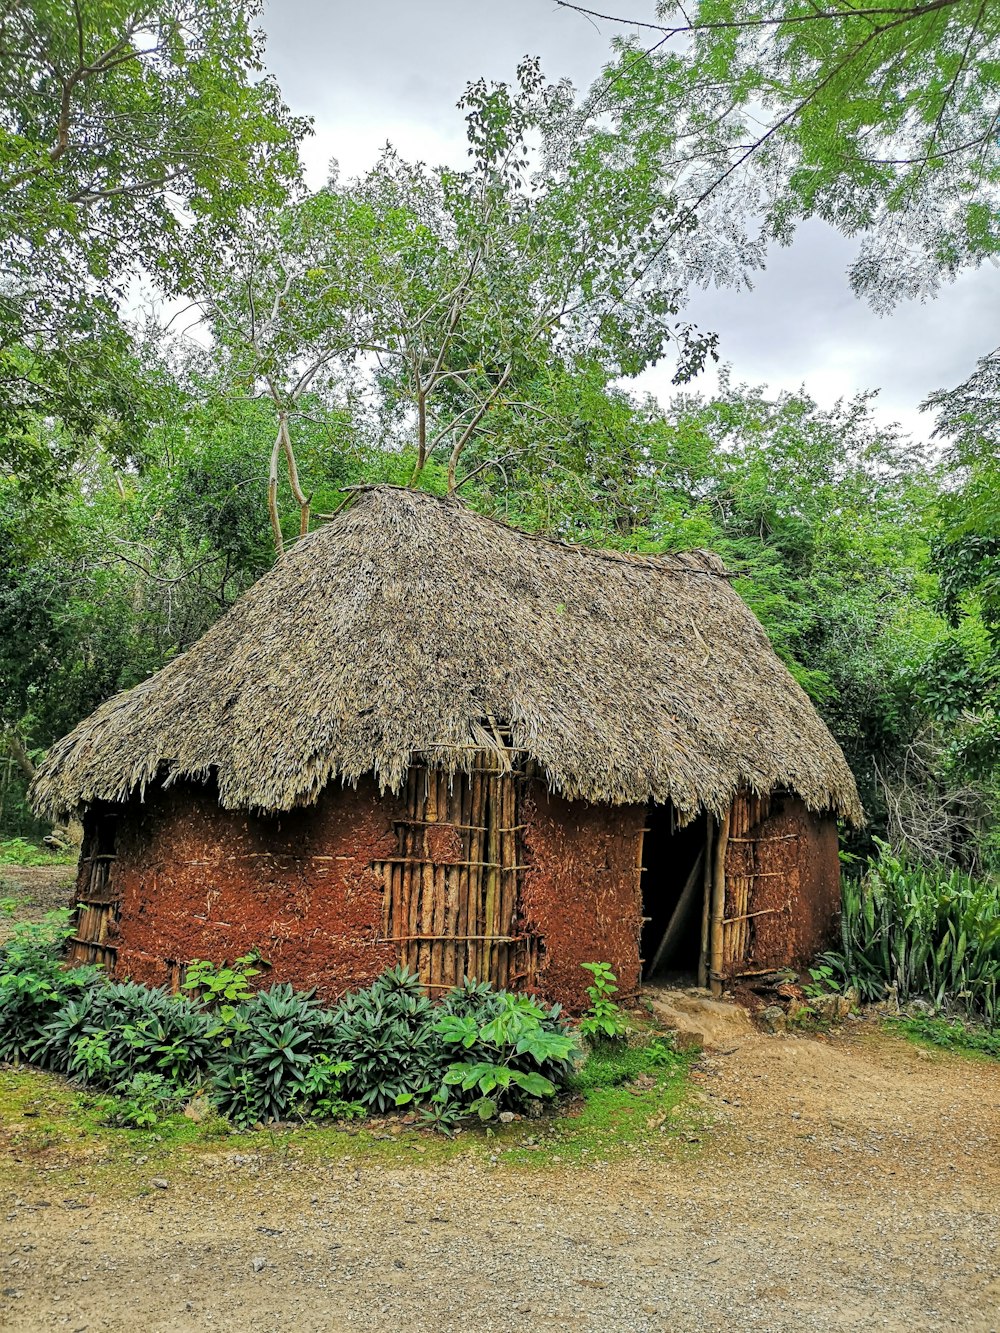 African Hut Pictures | Download Free Images on Unsplash